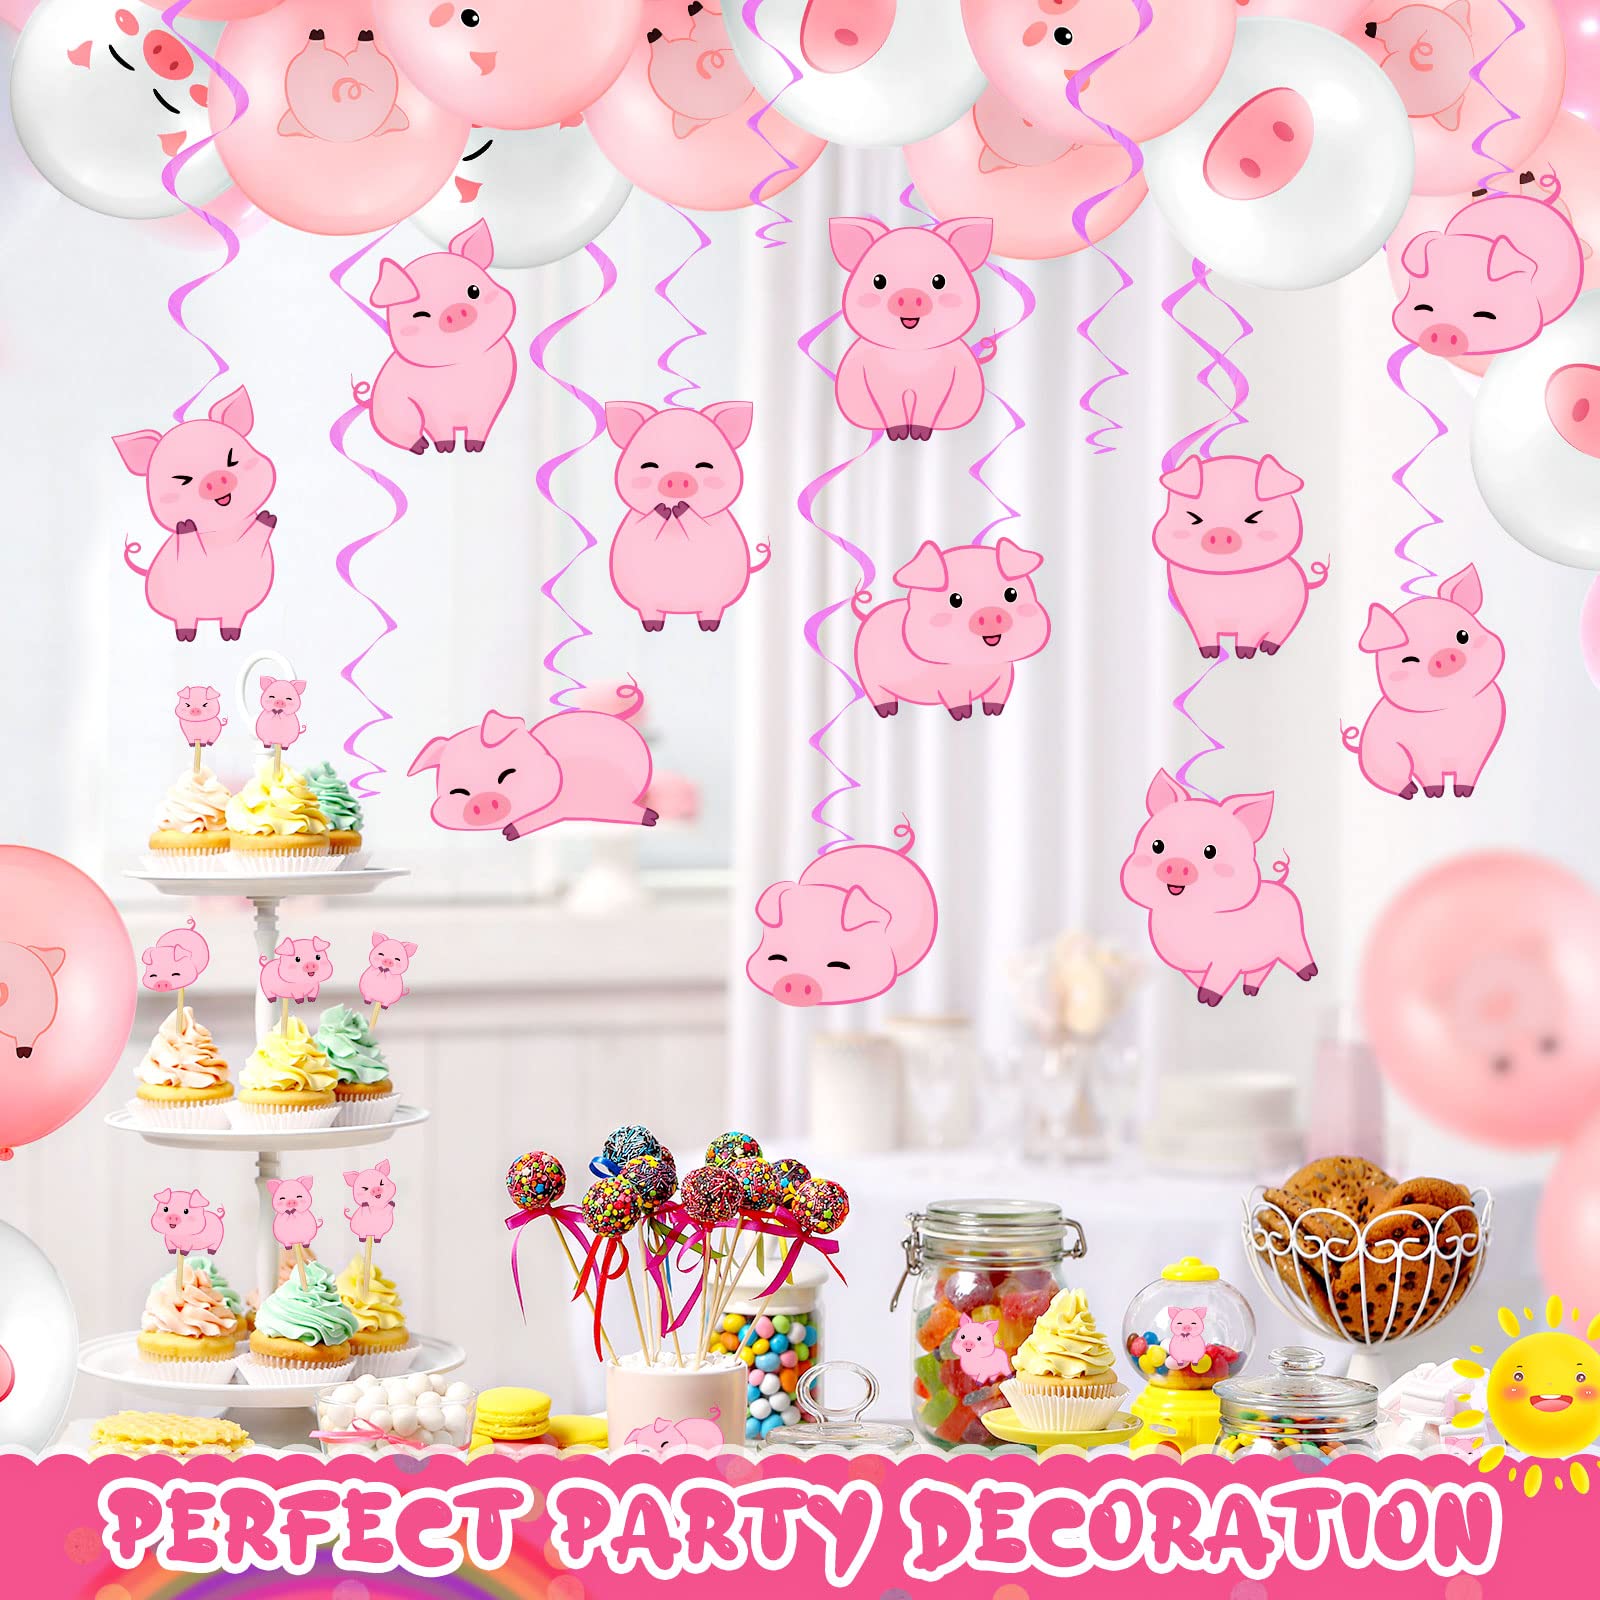 30 Pieces Pig Farm Animal Party Hanging Swirl Decorations Barnyard Theme Birthday Party Supplies Pink Piggy Hanging Foil Swirls Ceiling Decor for Girls Boys Kids Baby Shower Supplies